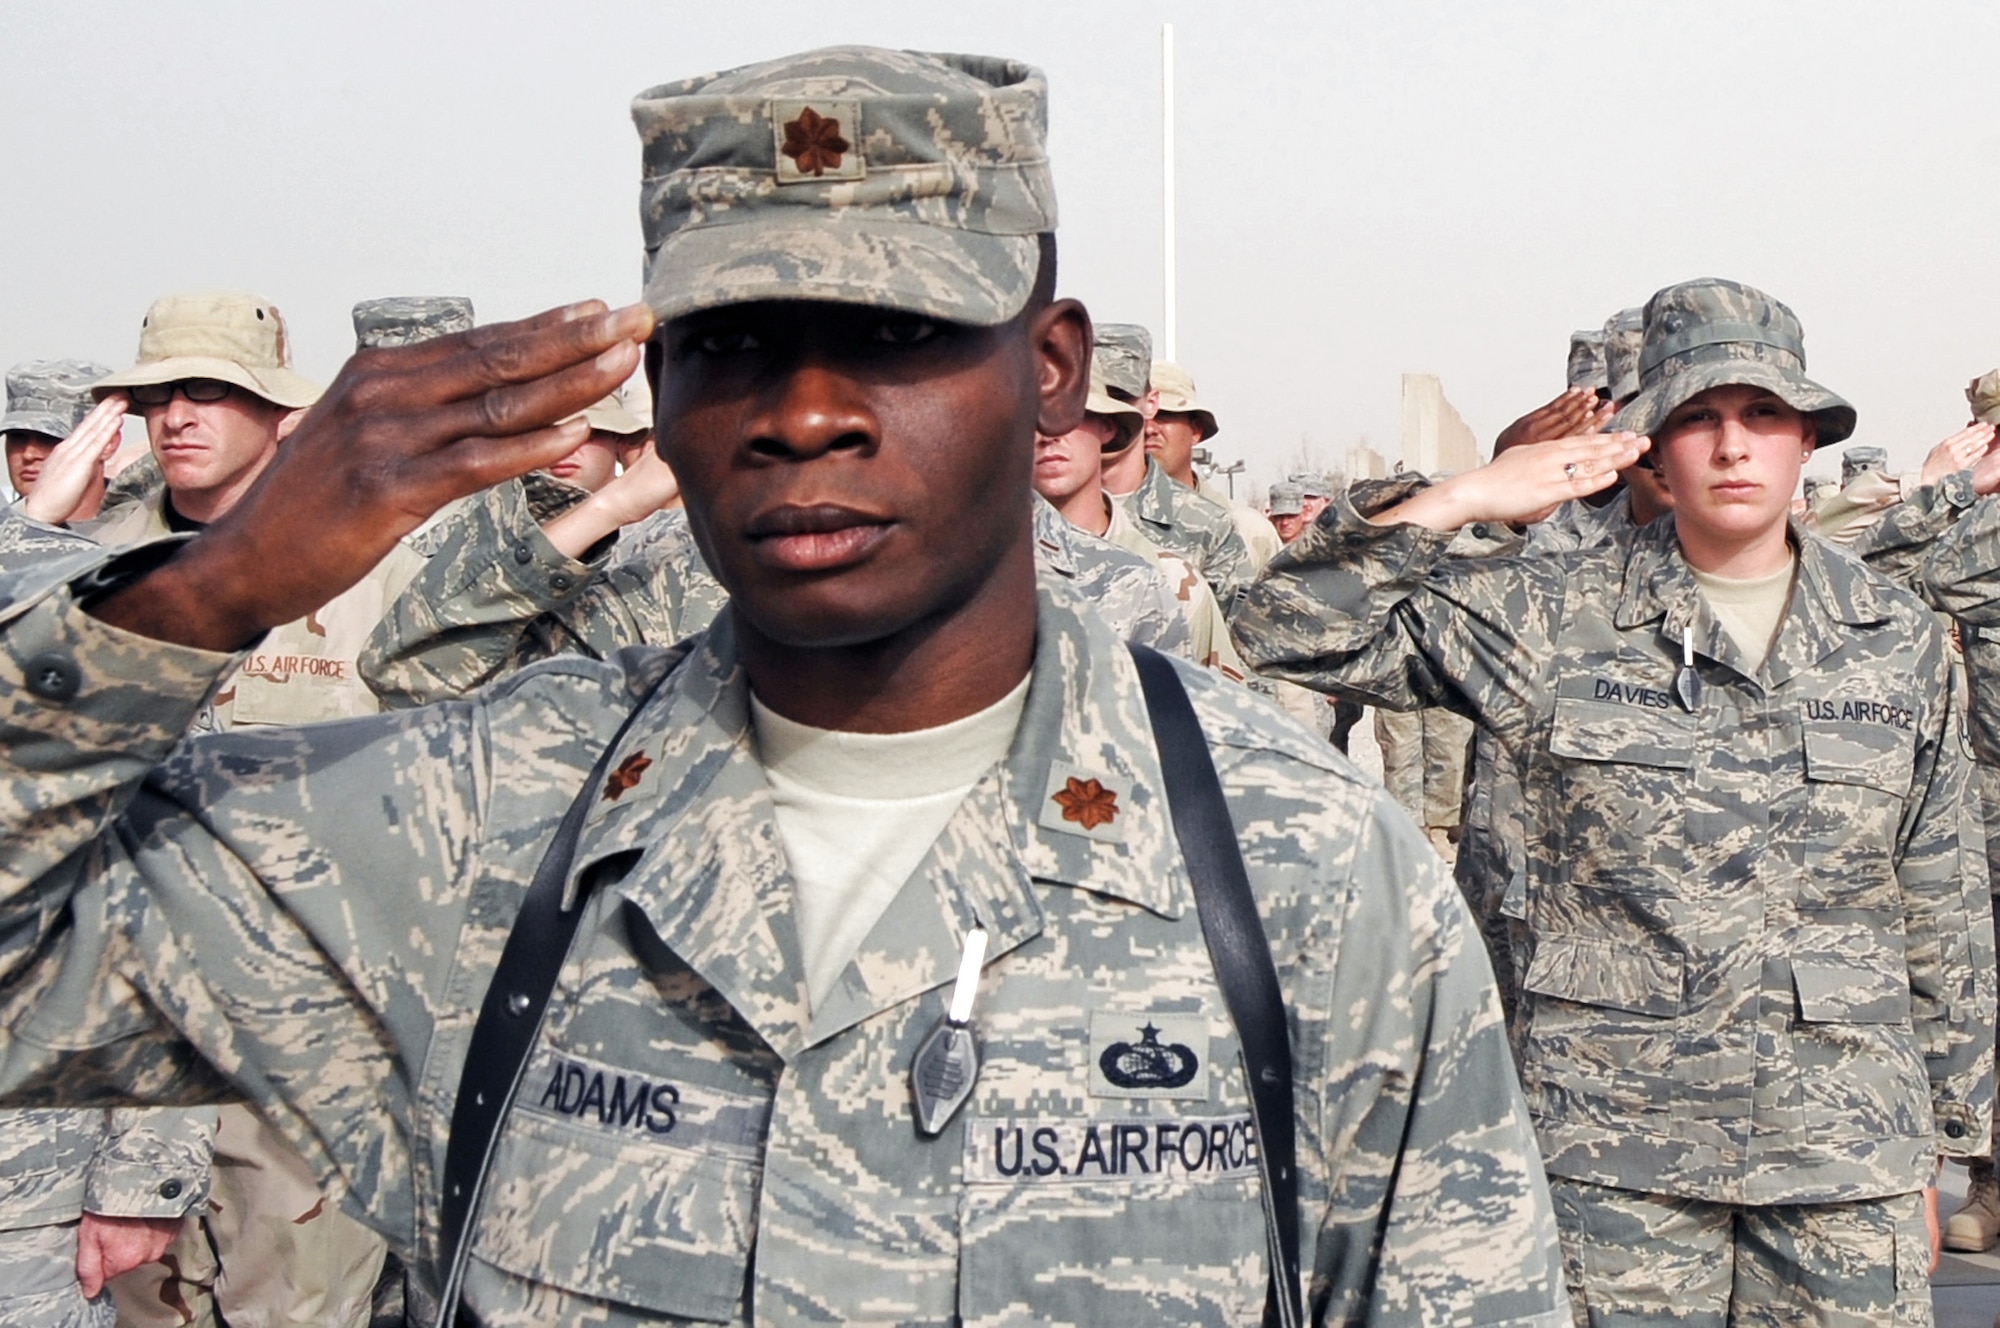 Maj. Terrence Adams salutes during a retreat ceremony May 15 at Ali Base, Iraq. Major Adams was born and raised in Tuskegee, Ala., and is now deployed to a unit in the 332nd Air Expeditionary Wing where the Tuskegee legend continues. Major Adams is the 407th Expeditionary Communications Squadron commander deployed from Tinker Air Force Base, Okla. (U.S. Air Force photo/Tech. Sgt. Sabrina Johnson) 
